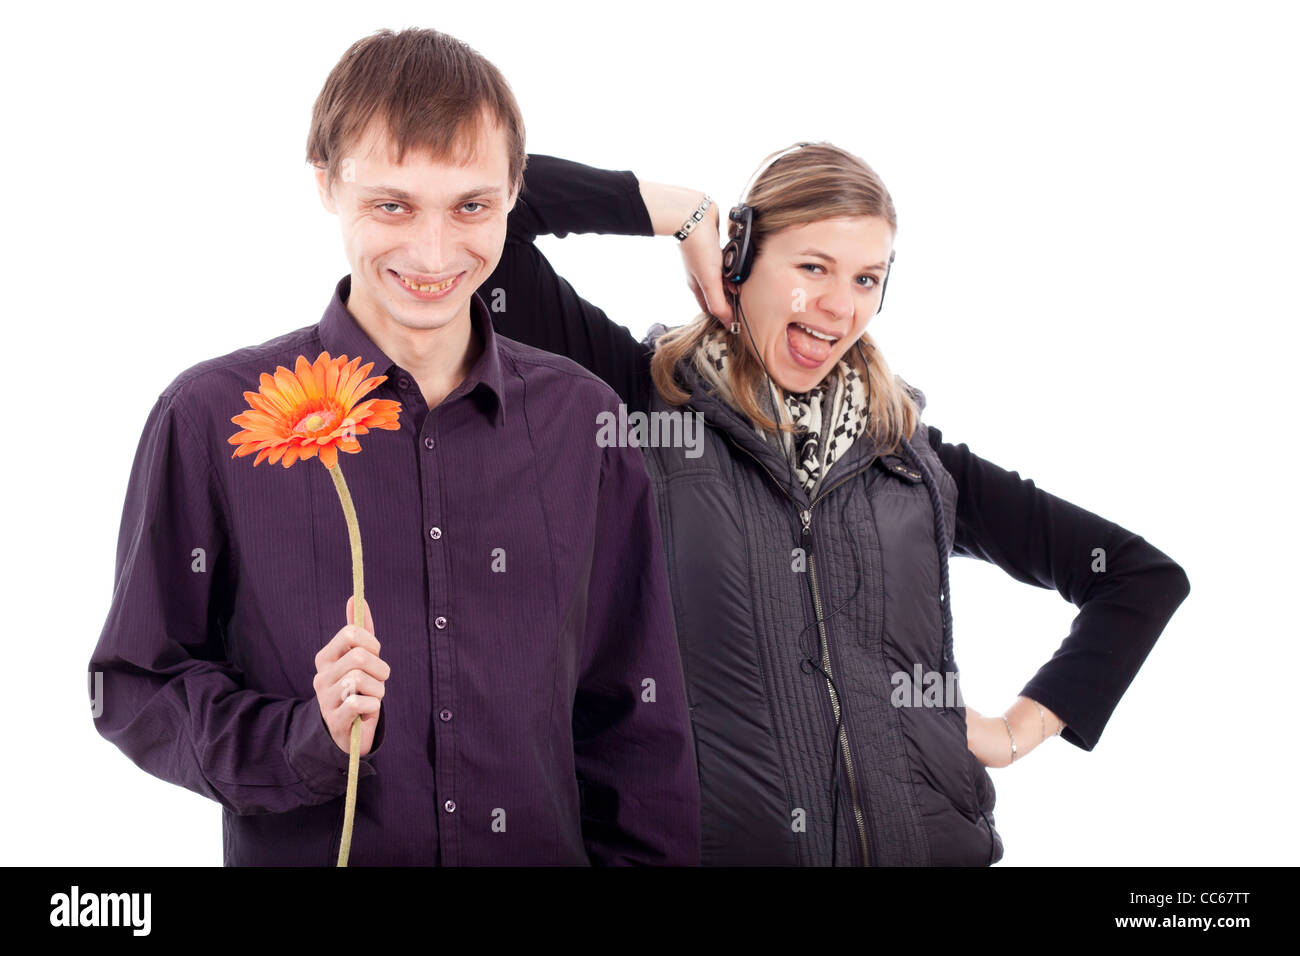 Funny weird couple, ugly man holding flower and rebel woman, isolated on white background. Beauty and the Beast concept. Stock Photo